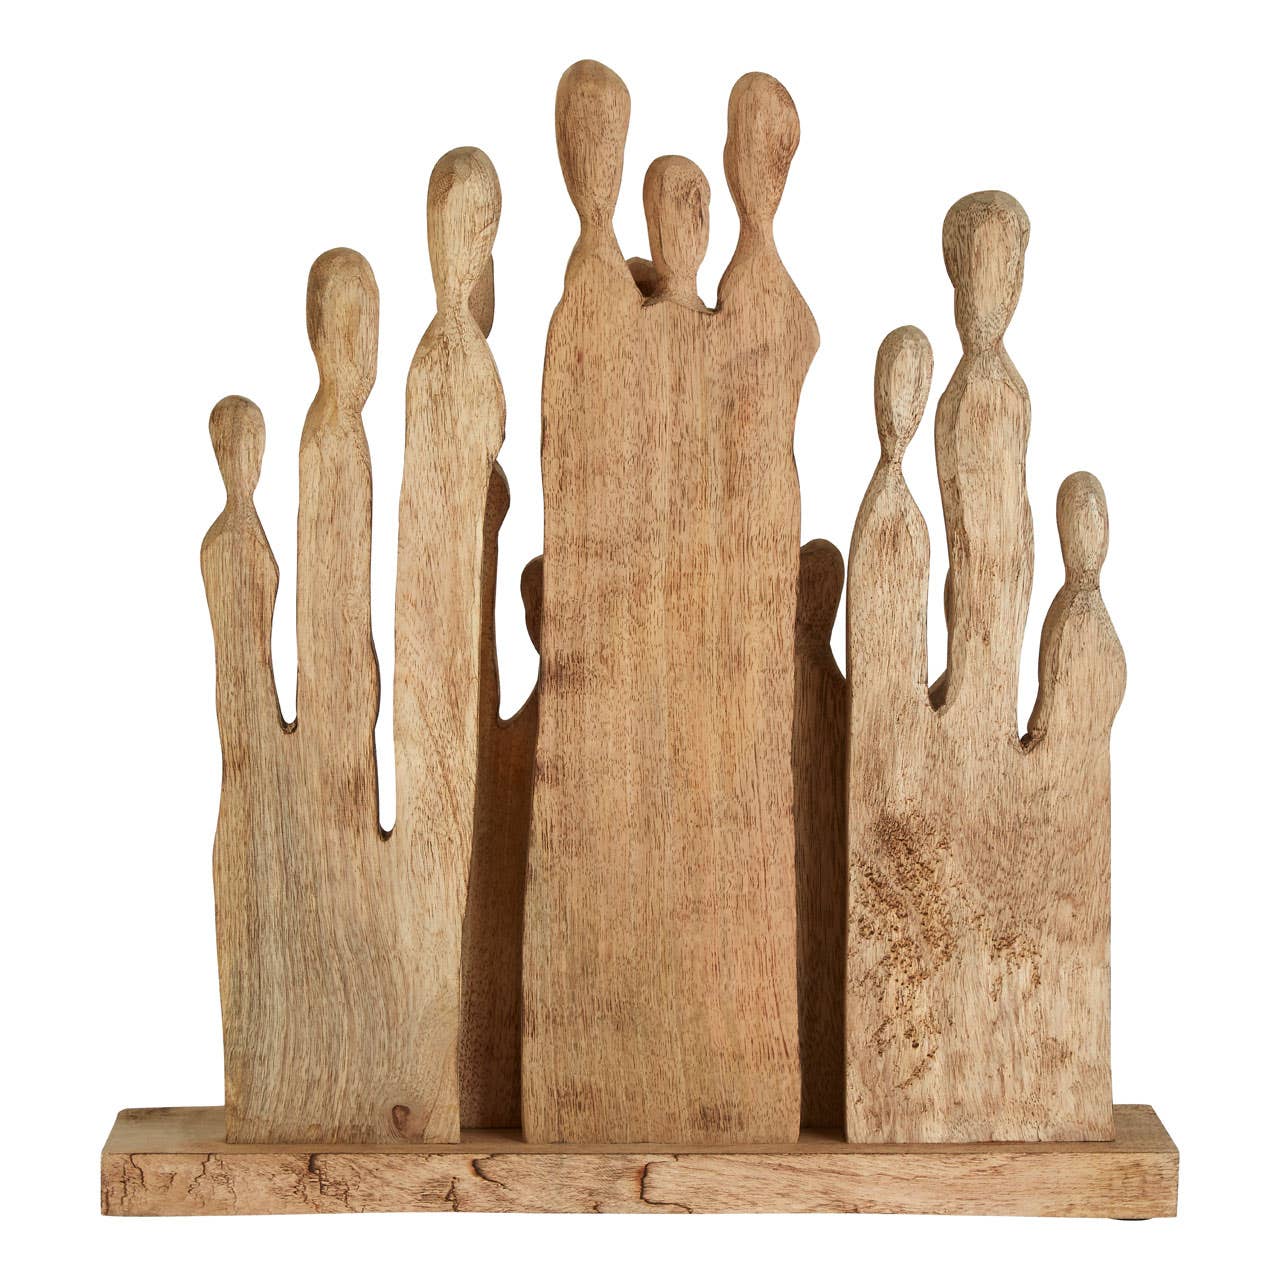 Noosa & Co. Accessories Unity Group Wooden Sculpture House of Isabella UK